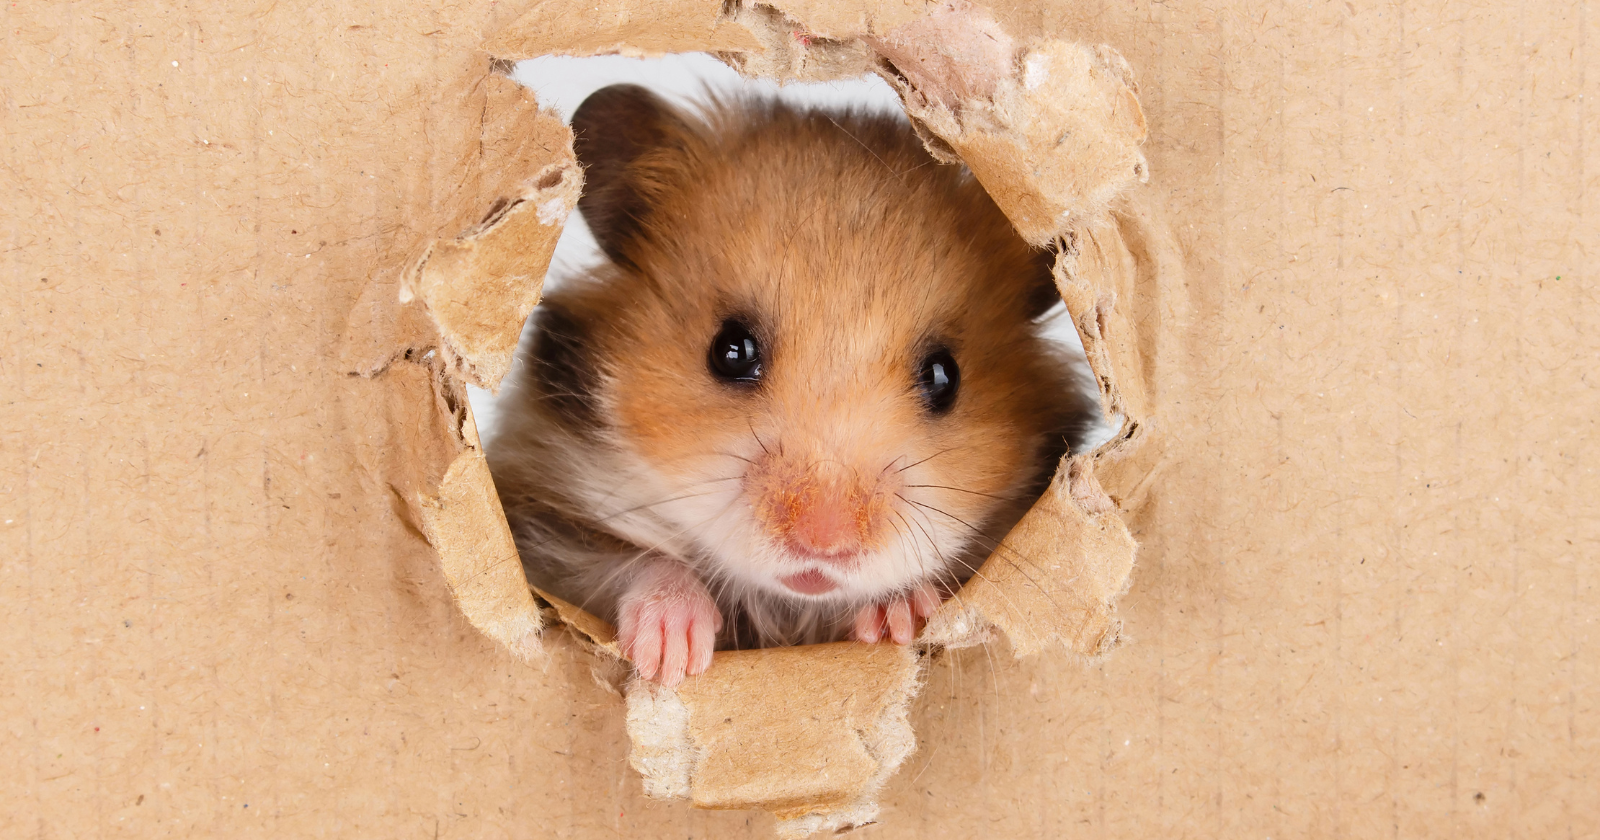 The Best Ways To Find A Missing Hamster